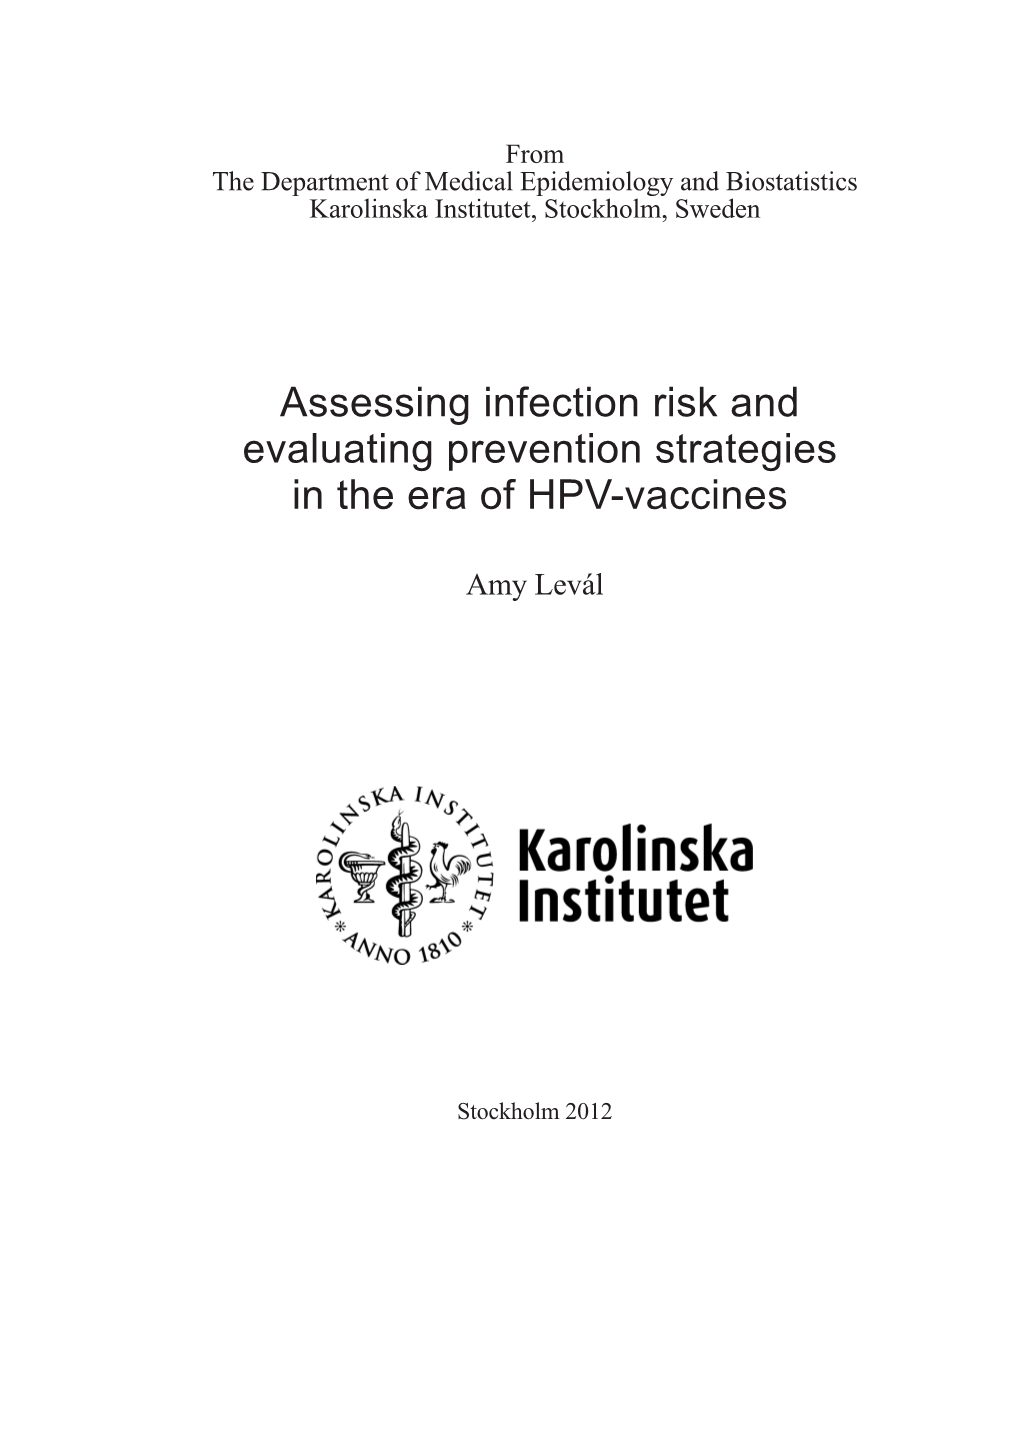 Assessing Infection Risk and Evaluating Prevention Strategies in the Era of Hpv-Vaccines